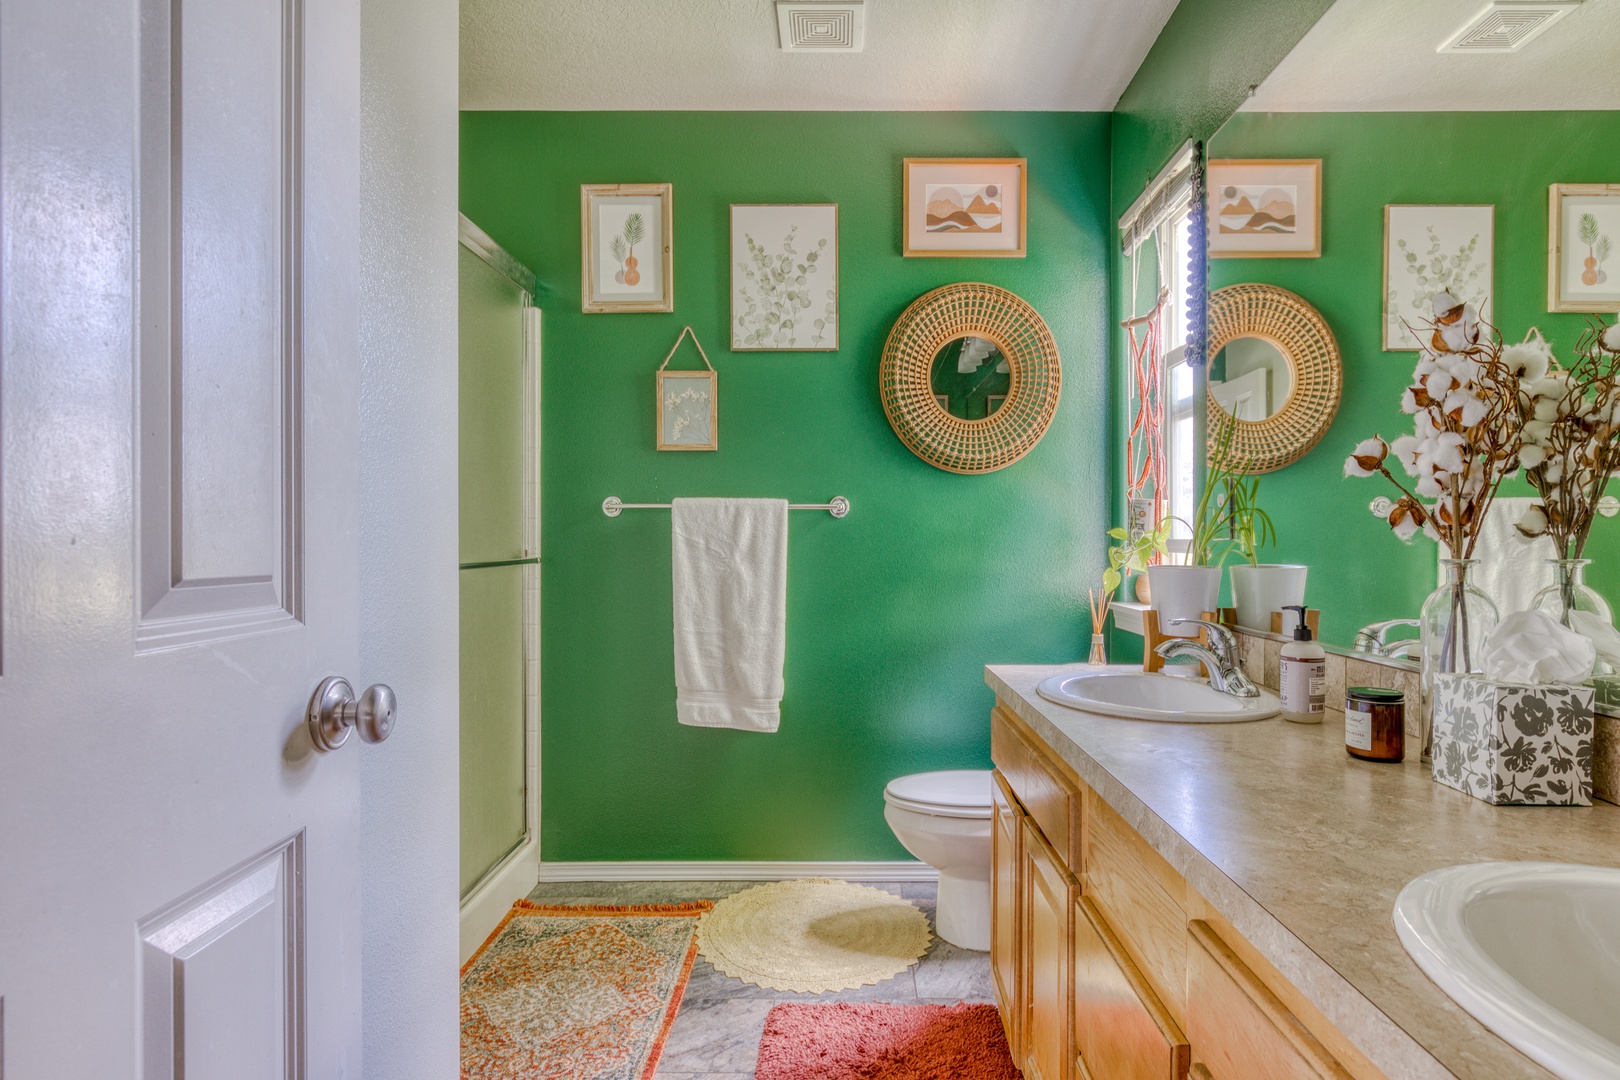 Clackamas Vacation Rentals, Duck Crossing - The ensuite bath is bright and lively